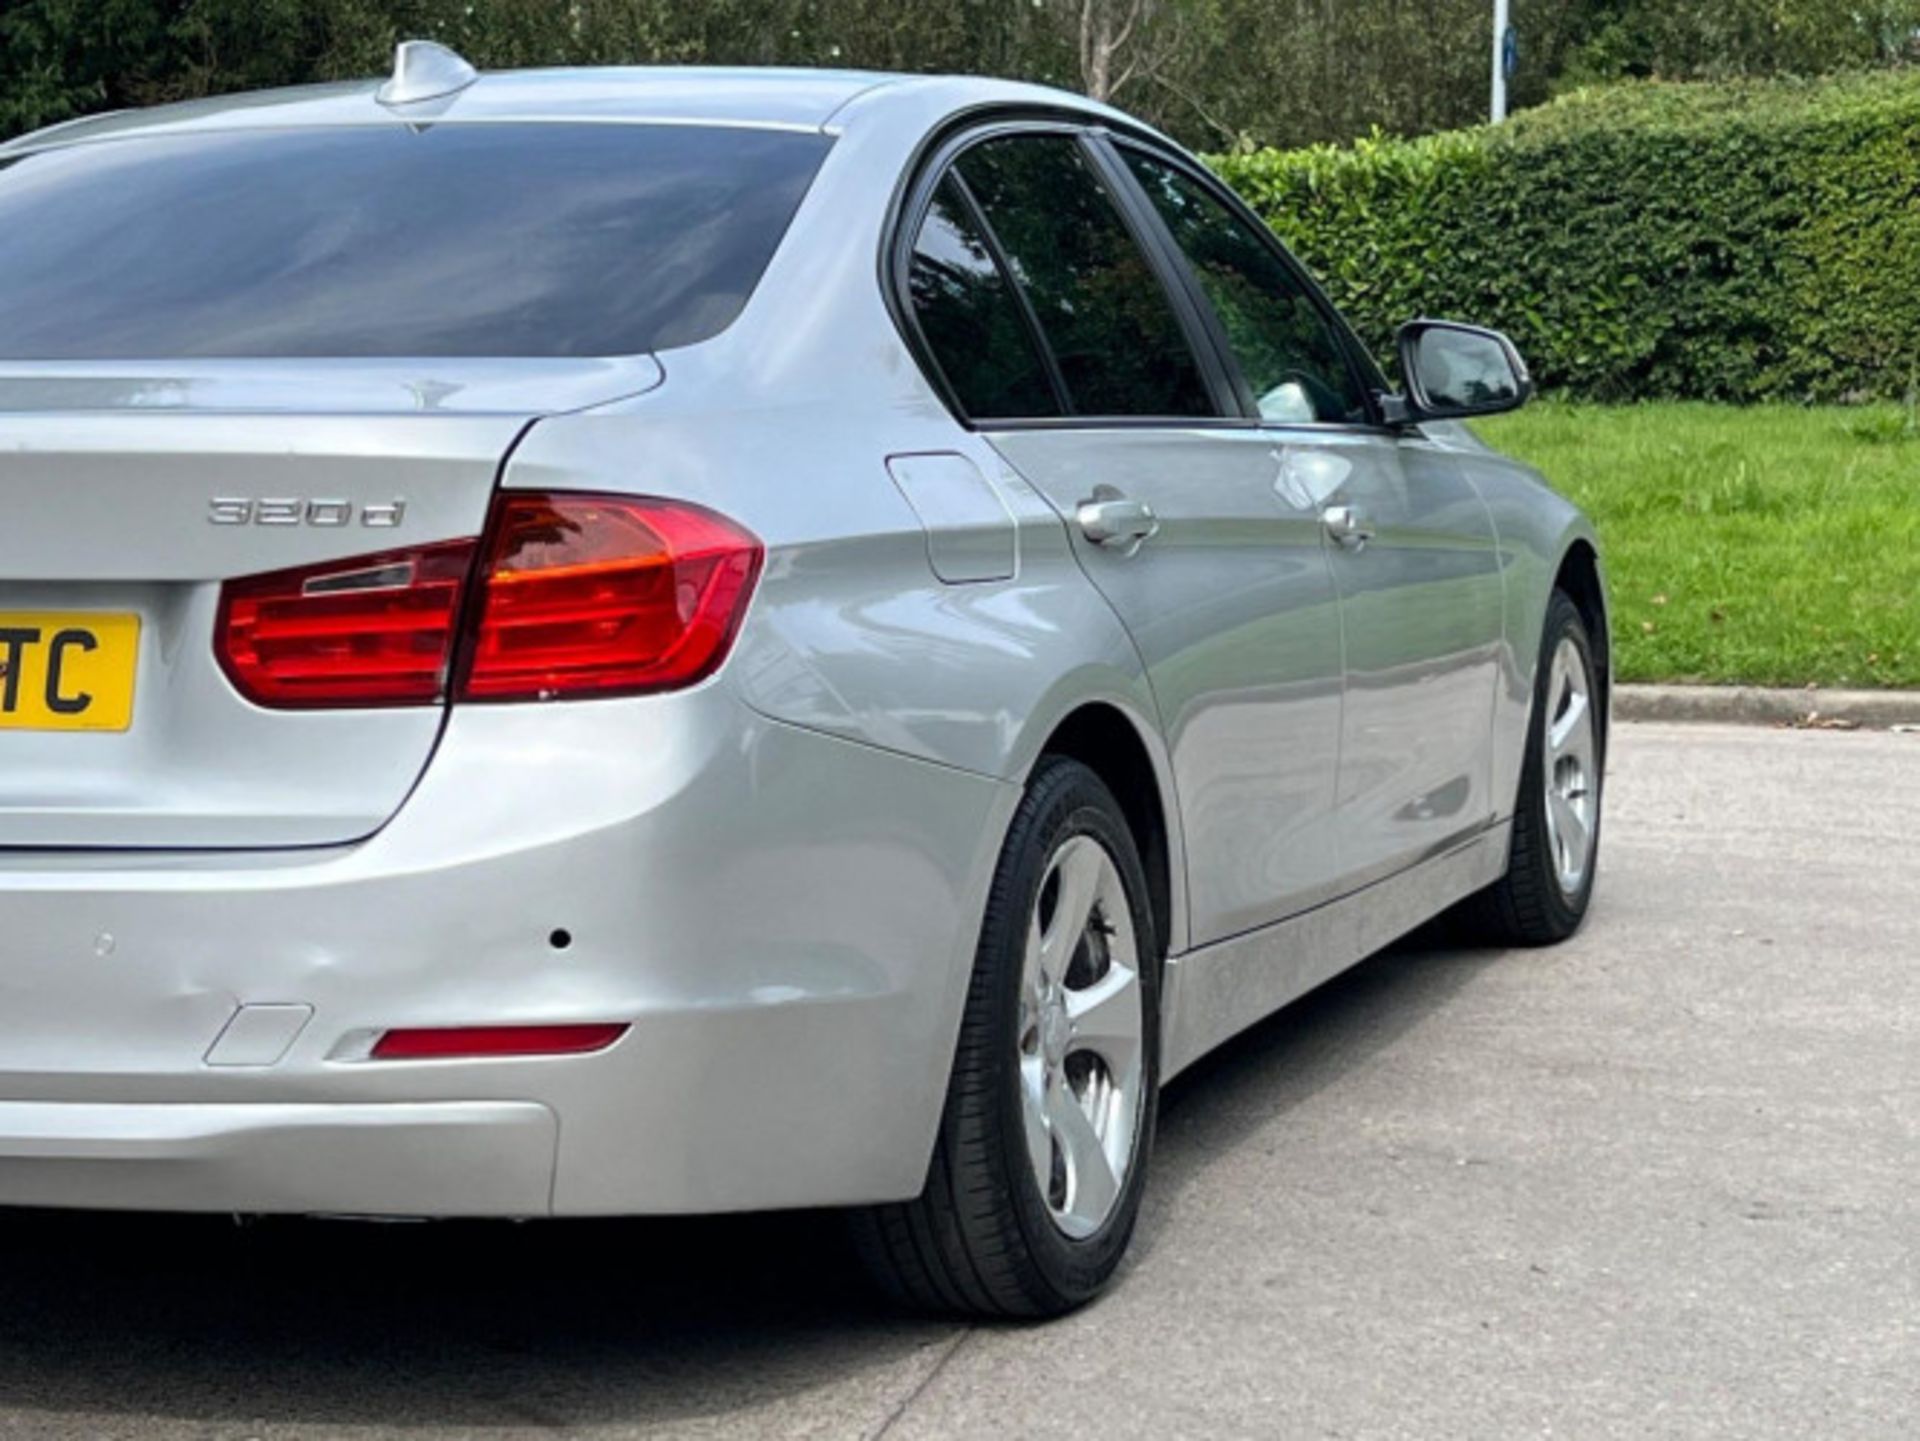 BMW 3 SERIES 2.0 DIESEL ED START STOP - A WELL-MAINTAINED GEM >>--NO VAT ON HAMMER--<< - Image 213 of 229